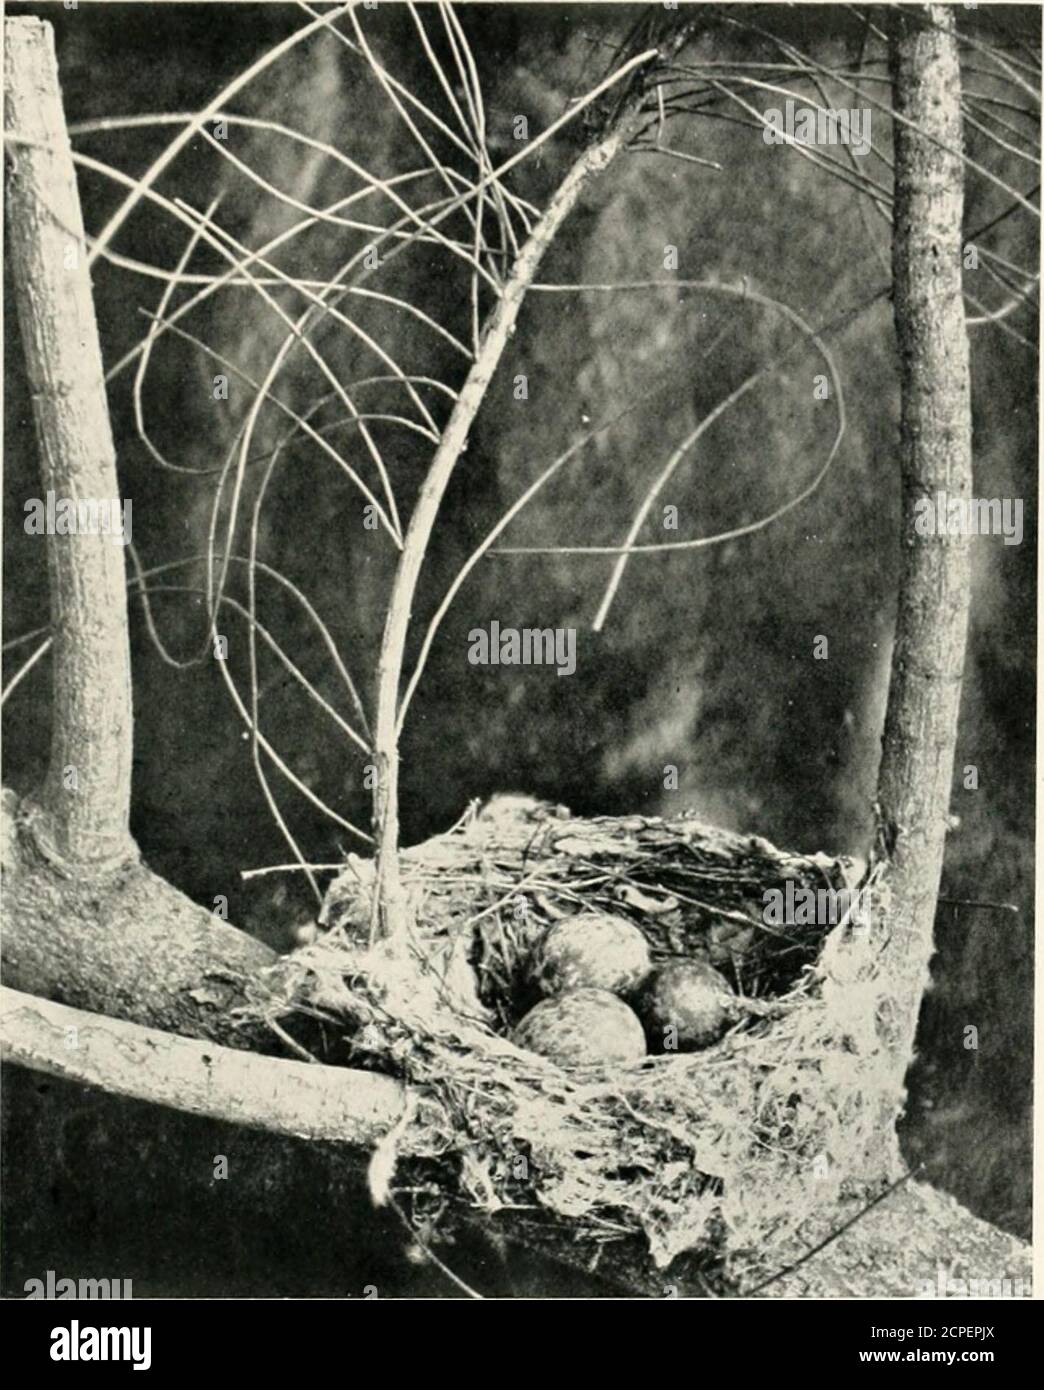 . Nests and eggs of Australian birds, including the geographical distribution of the species and popular observations thereon . a branch of a casuarina tree. 81.— Lalage LEUCOMELiENA, Vigors and Horsfield.—(110 and 111)CcinipepJiaija huamitla, Gould.C. karu, Lesson. PIED CATERPILLAR CATCHER. Figure.—Gould : Birds of Australia, fo!., vol. ii., pis, 6i and 62. Reference.—Cat. Birds. Brit. Mus., vol. iv . p 106, Previous Descriptions of Eggs.—Fitzgerald : Proc Linn, Soc, N.S. Wales,vol. ii., 2nd ser., p. 971 (18S7) Geographical Di.itrihution.—Northern Tenitory, Queensland, and NewSouth Wales ; al Stock Photo